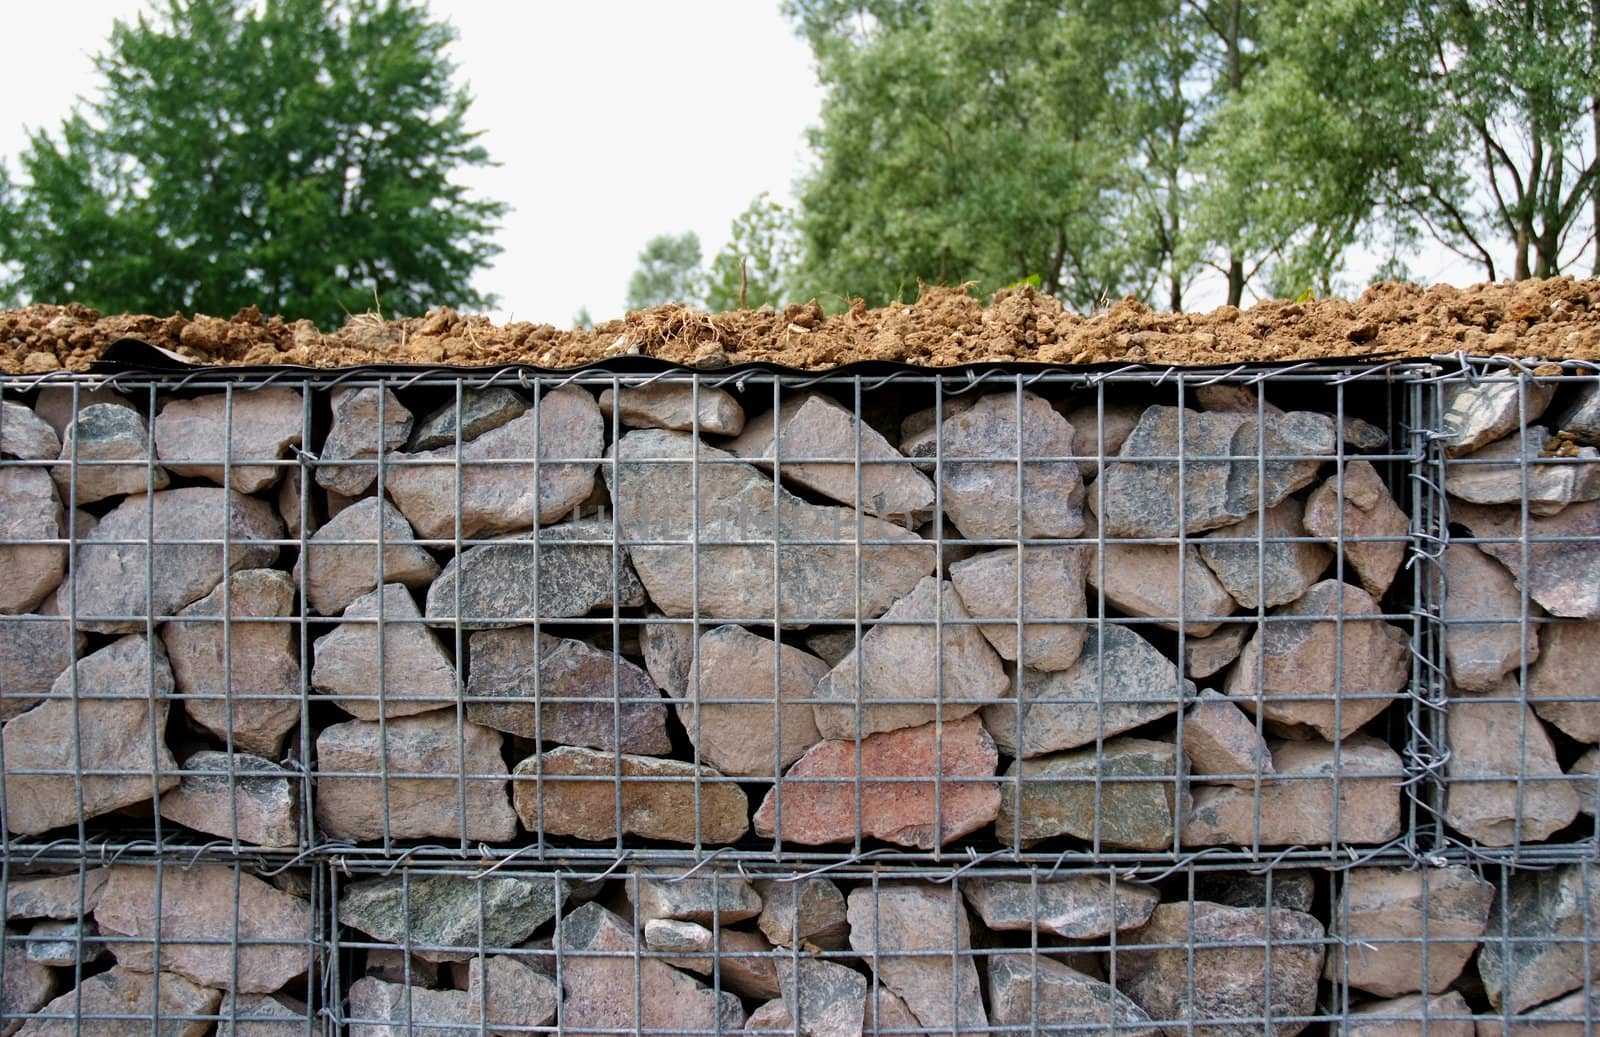 Metal cages with stone inside, used for building and shoring up of an embankment for example a motorway or for forming a sea defence or the like.